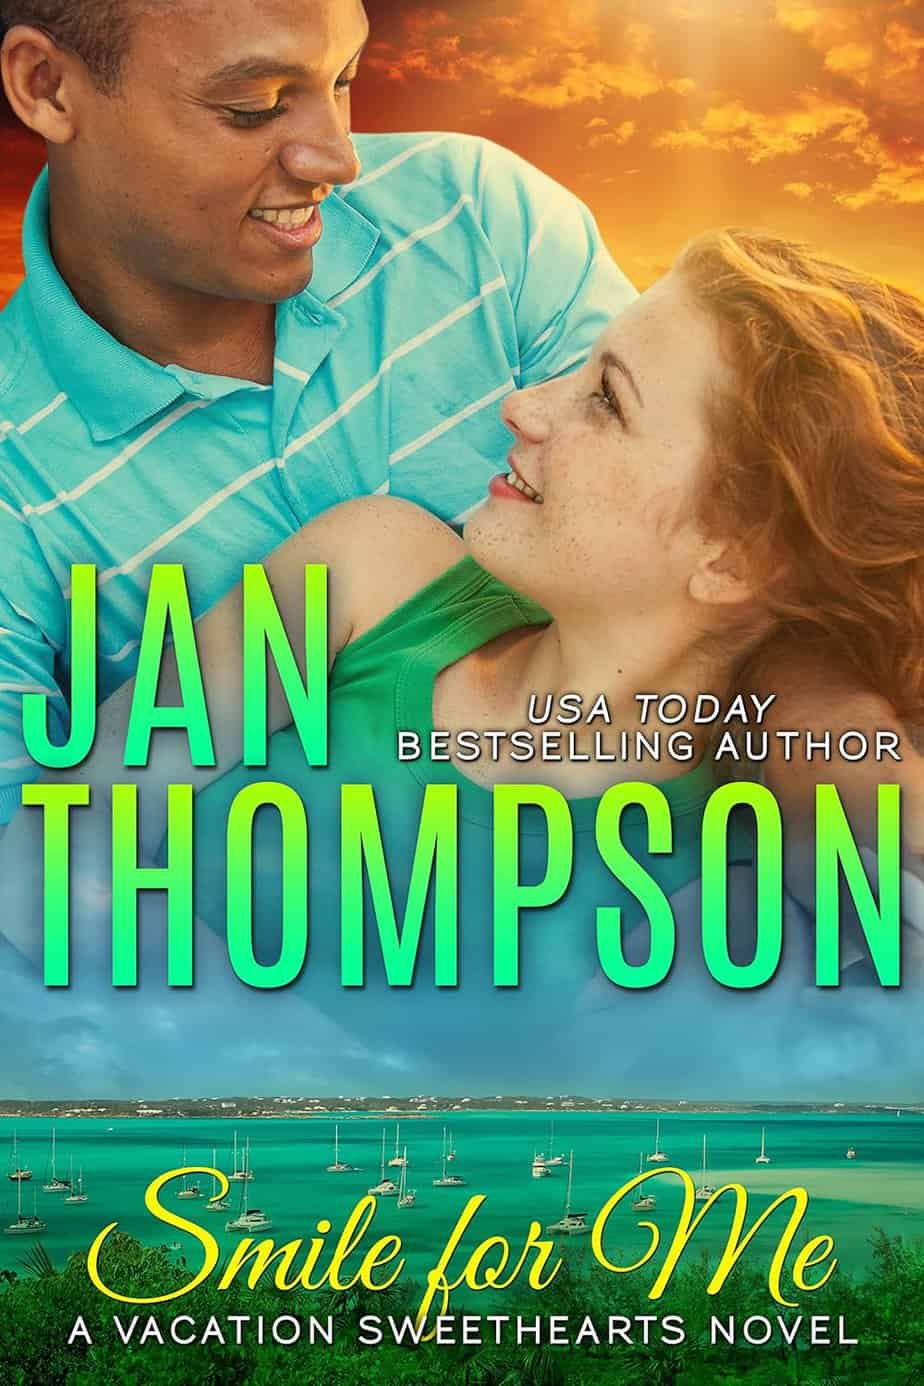 Cover image for Smile for Me by Jan Thompson, an interracial Christian Contemporary romance in the Bahamas.